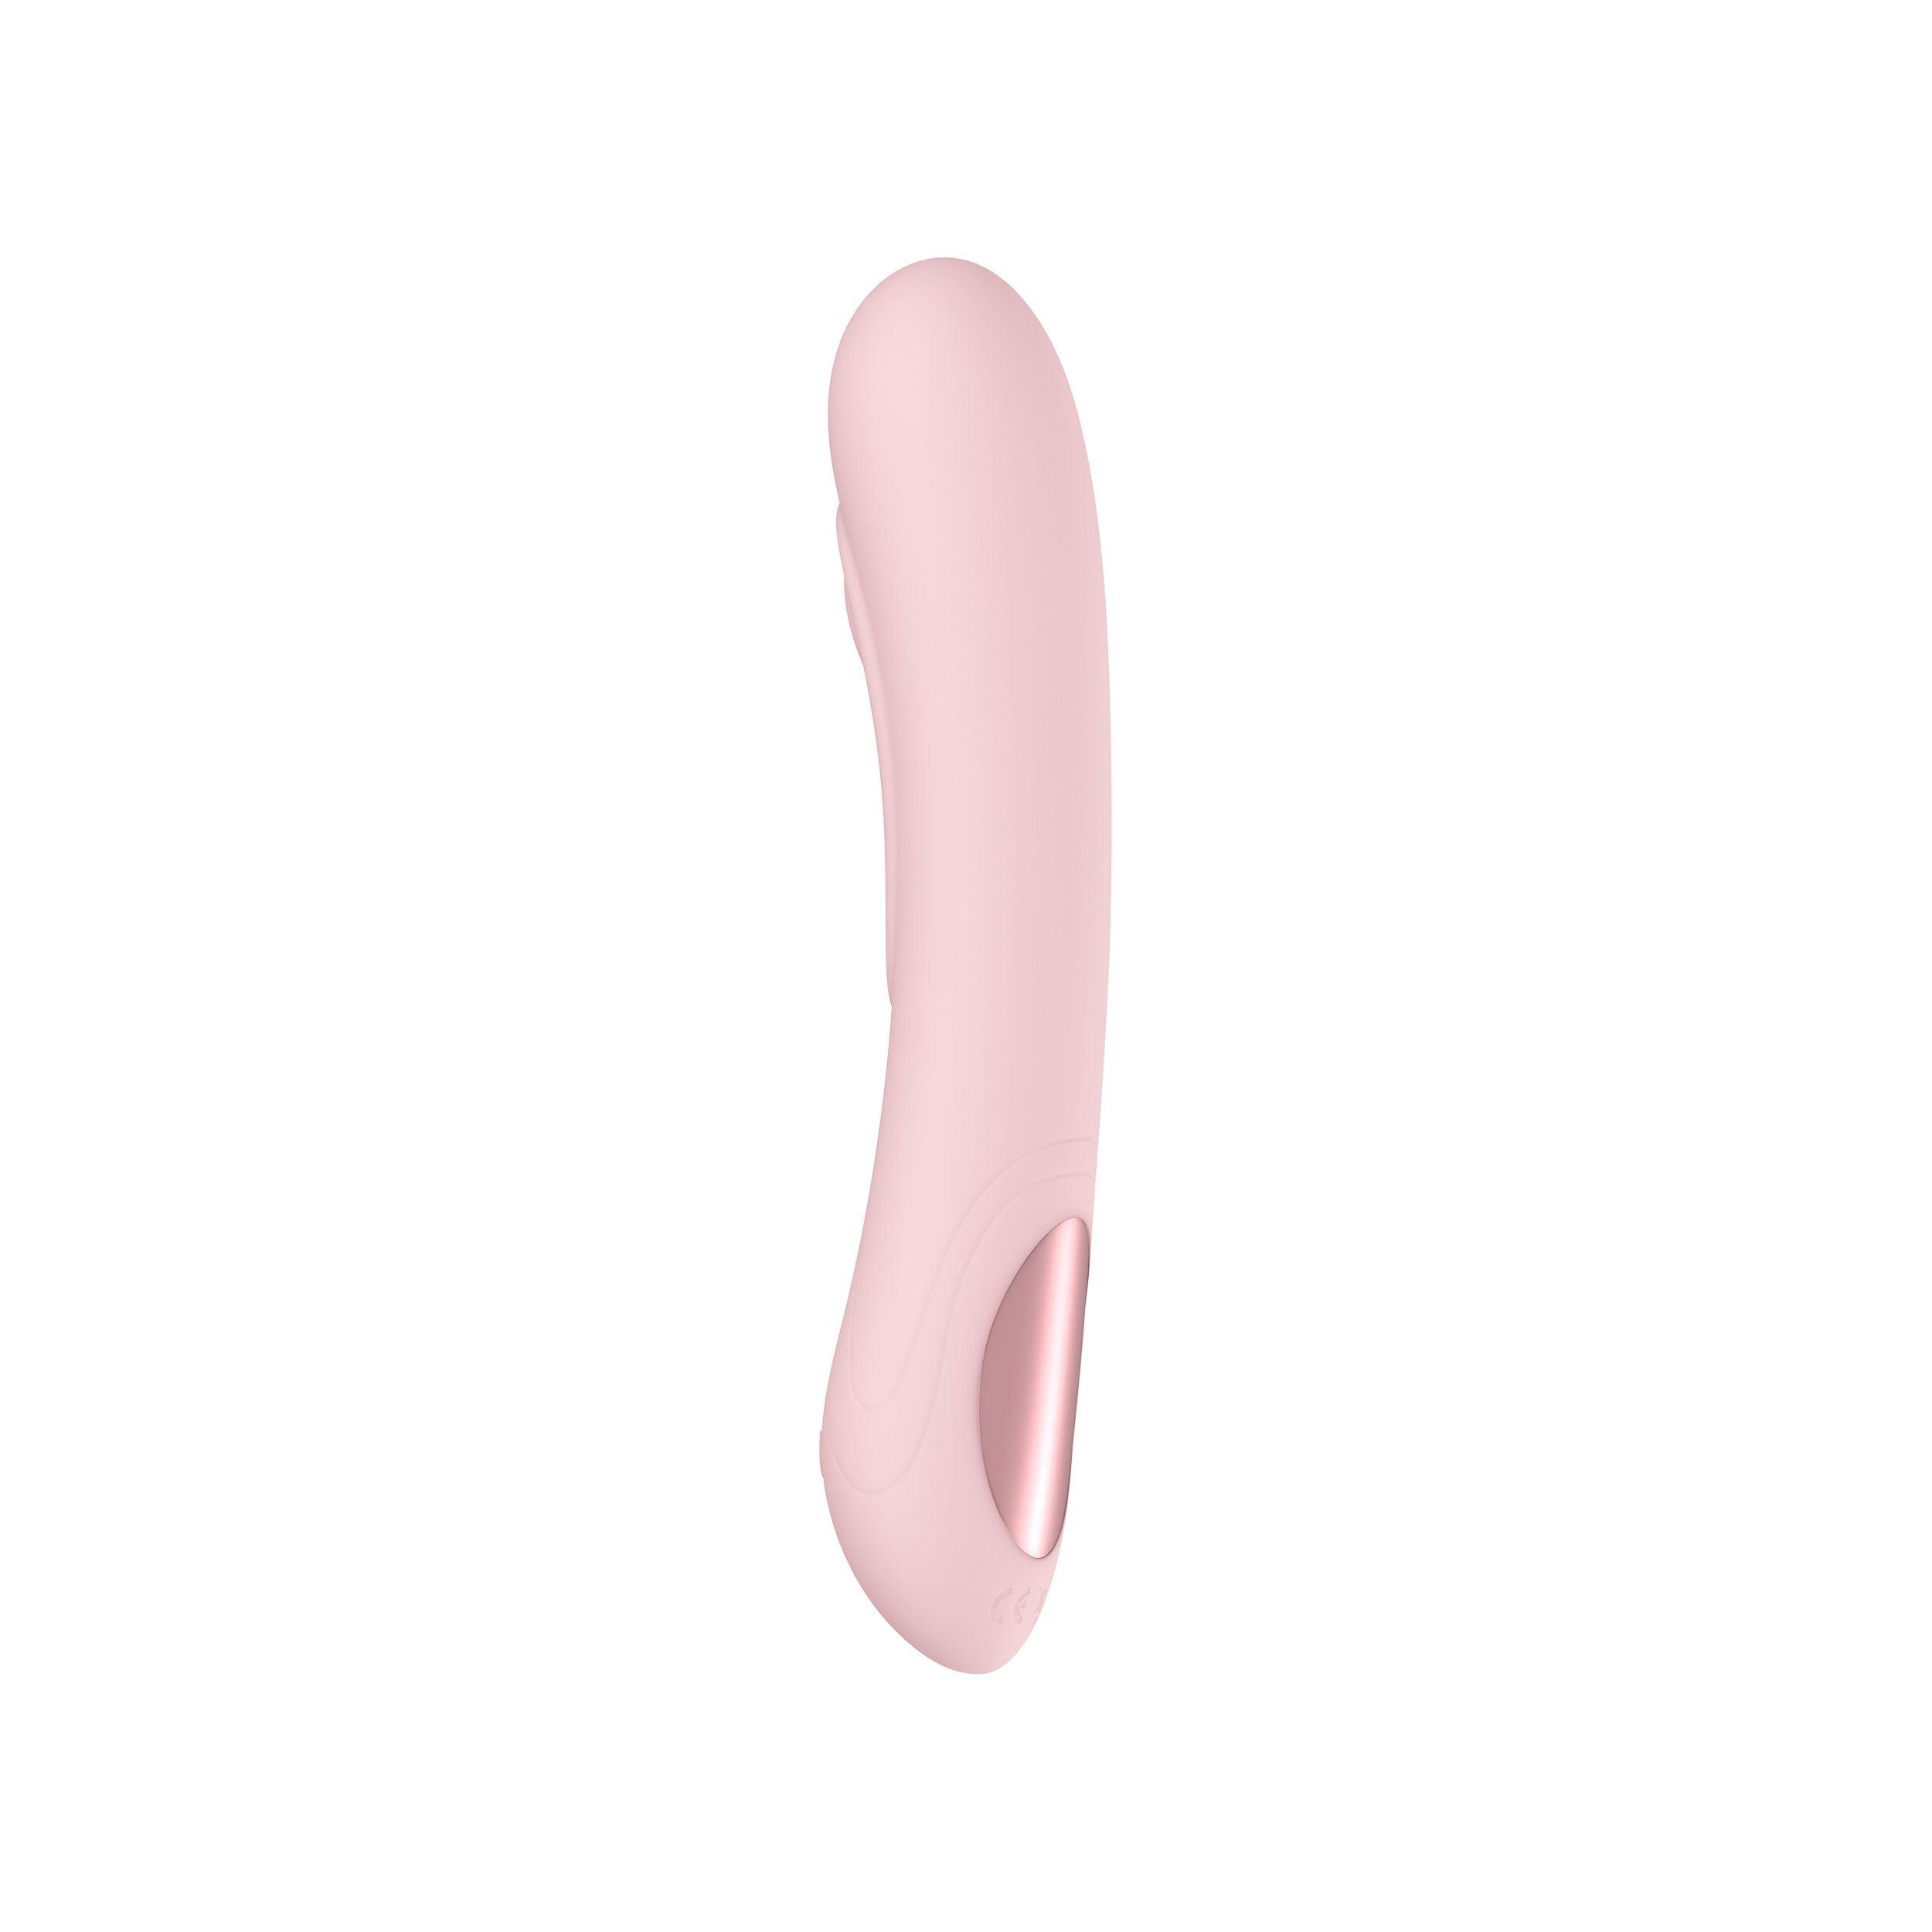 Kiiroo Pearl 3 G Spot Vibrator - Buy At Luxury Toy X - Free 3-Day Shipping